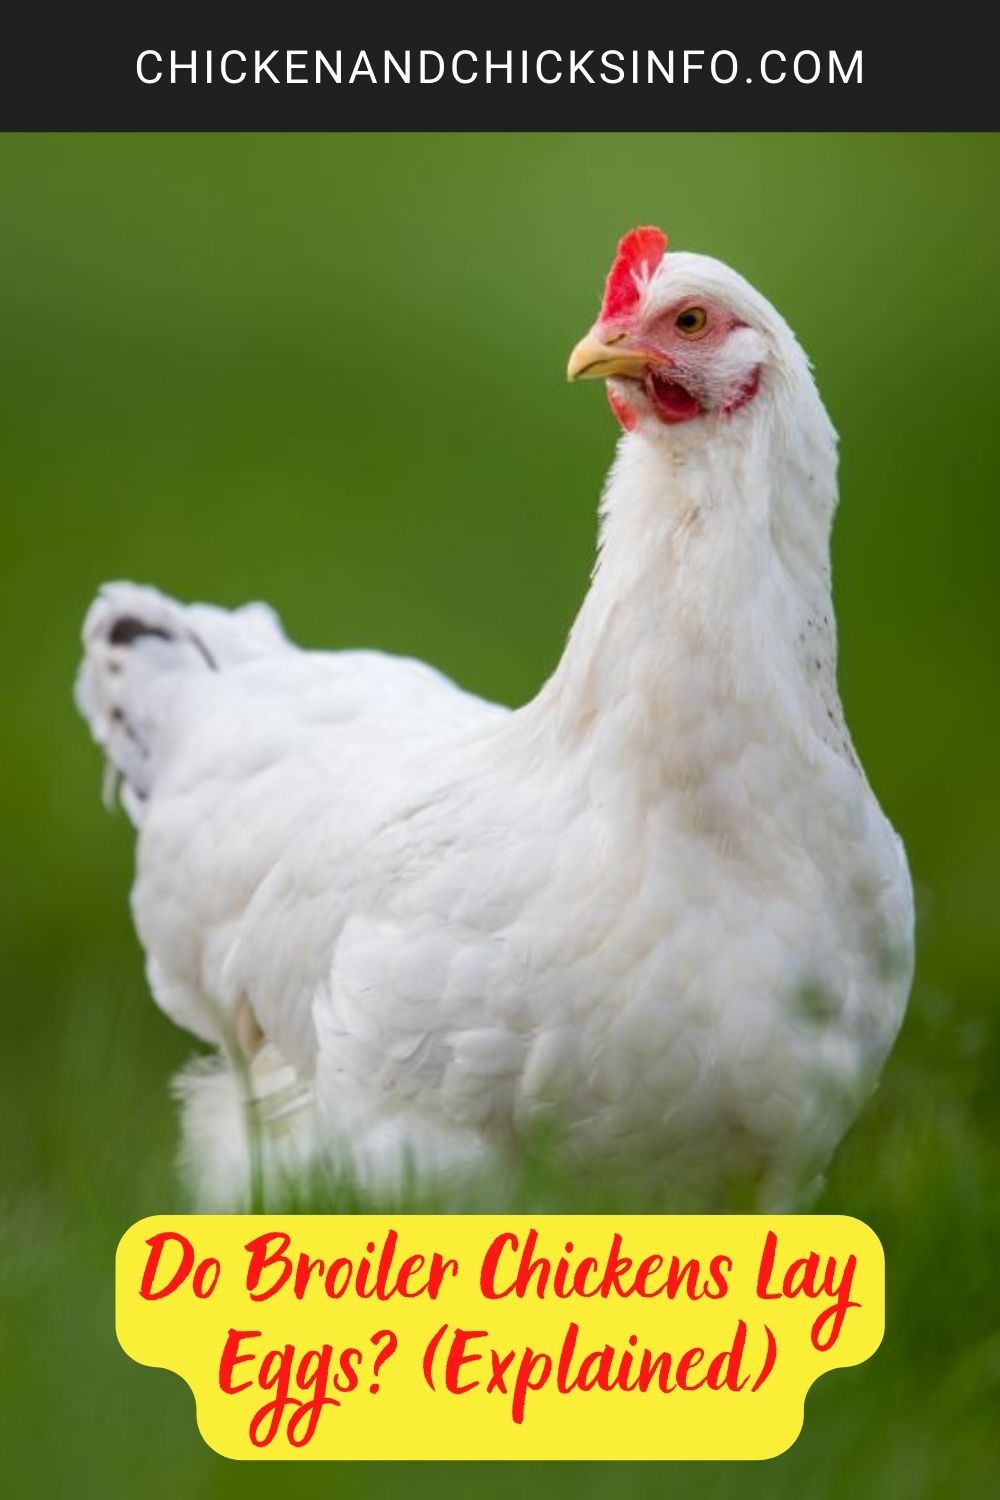 Do Broiler Chickens Lay Eggs? (Explained) poster.